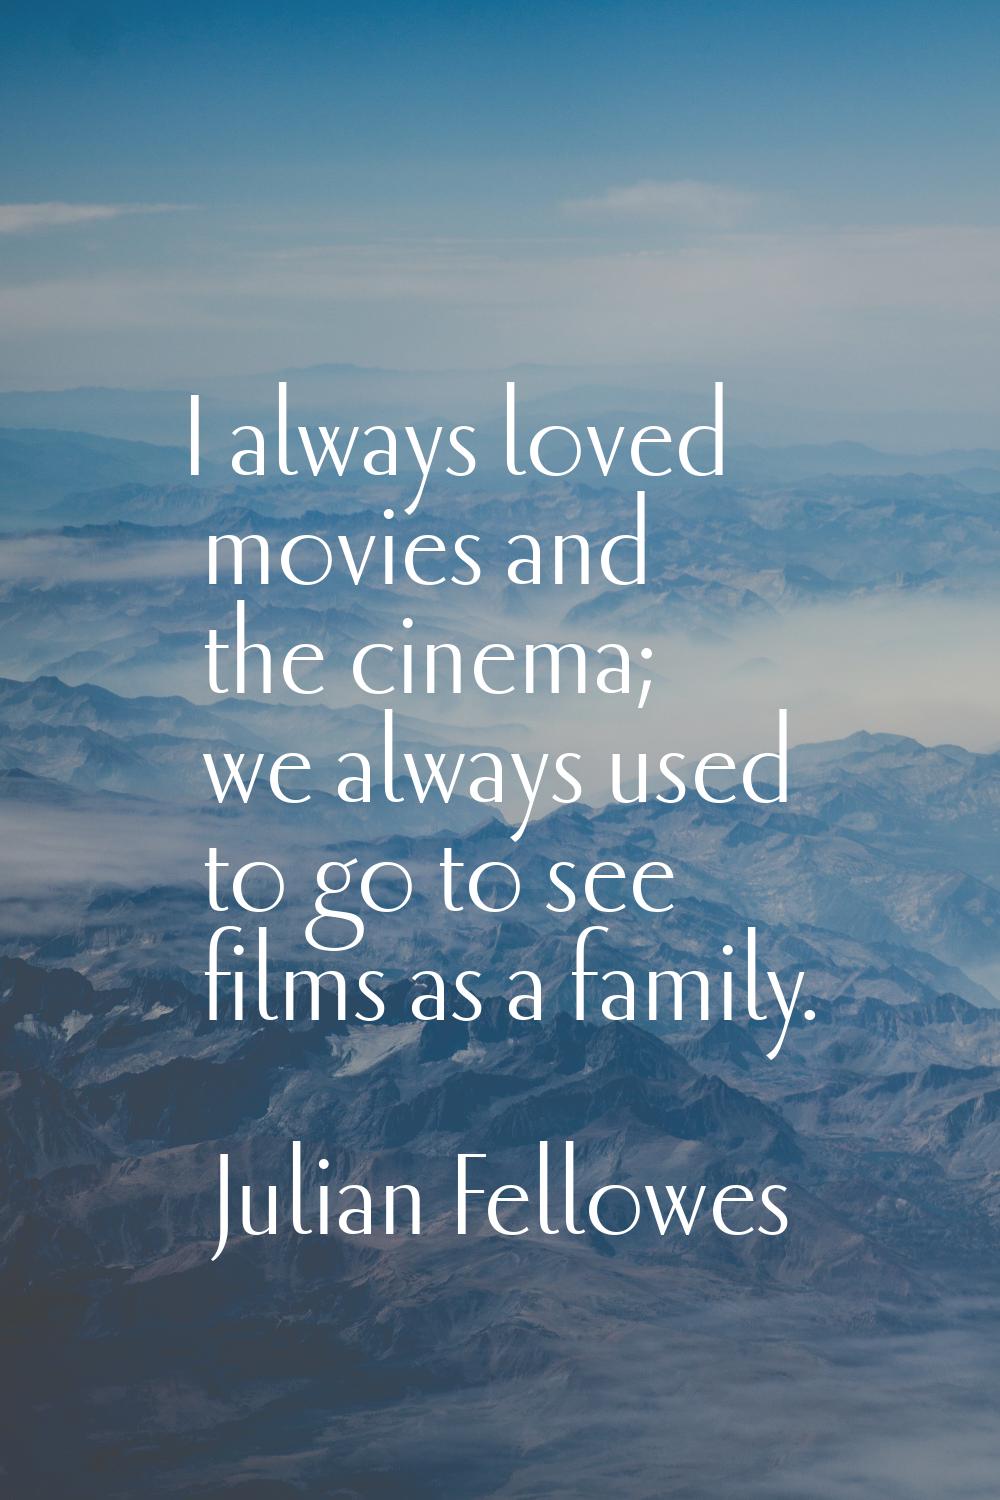 I always loved movies and the cinema; we always used to go to see films as a family.